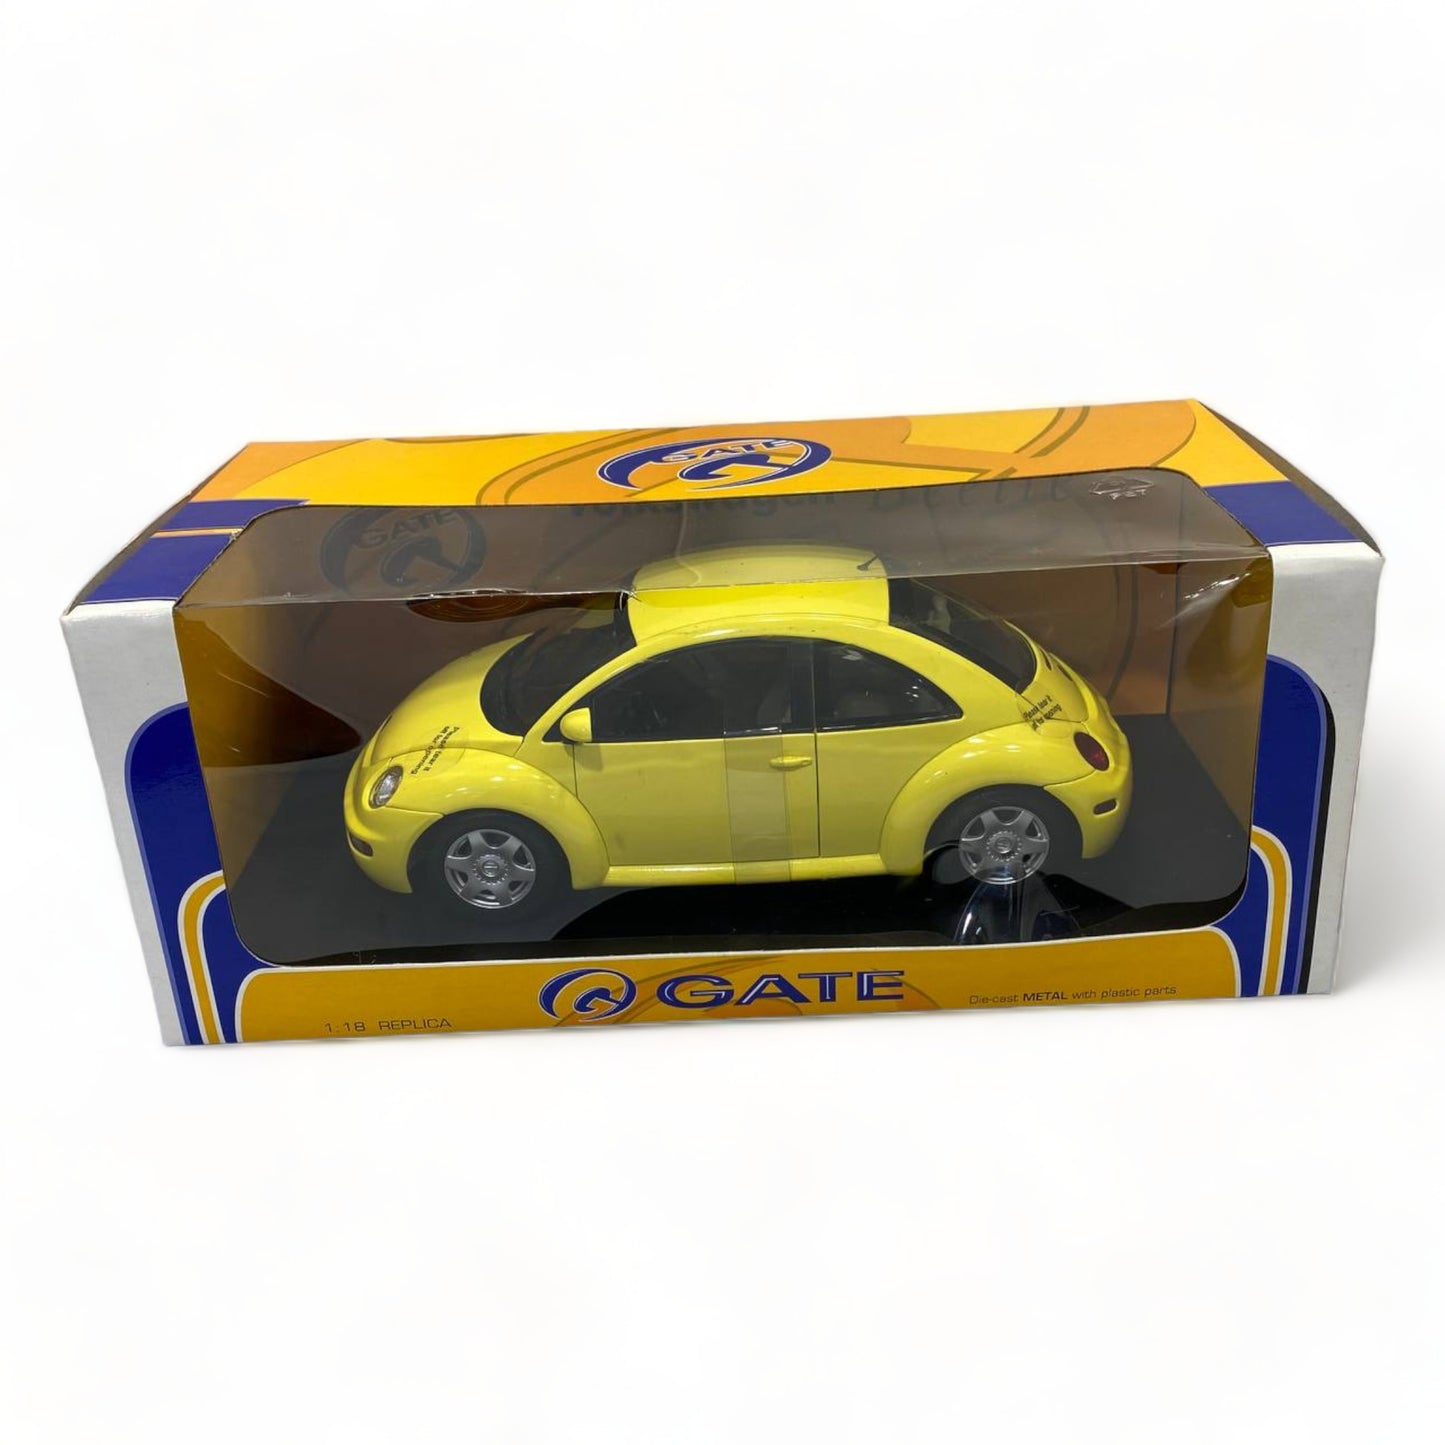 1/18 GATE G Volkswagen BEETLE COUPE YELLOW Model Car